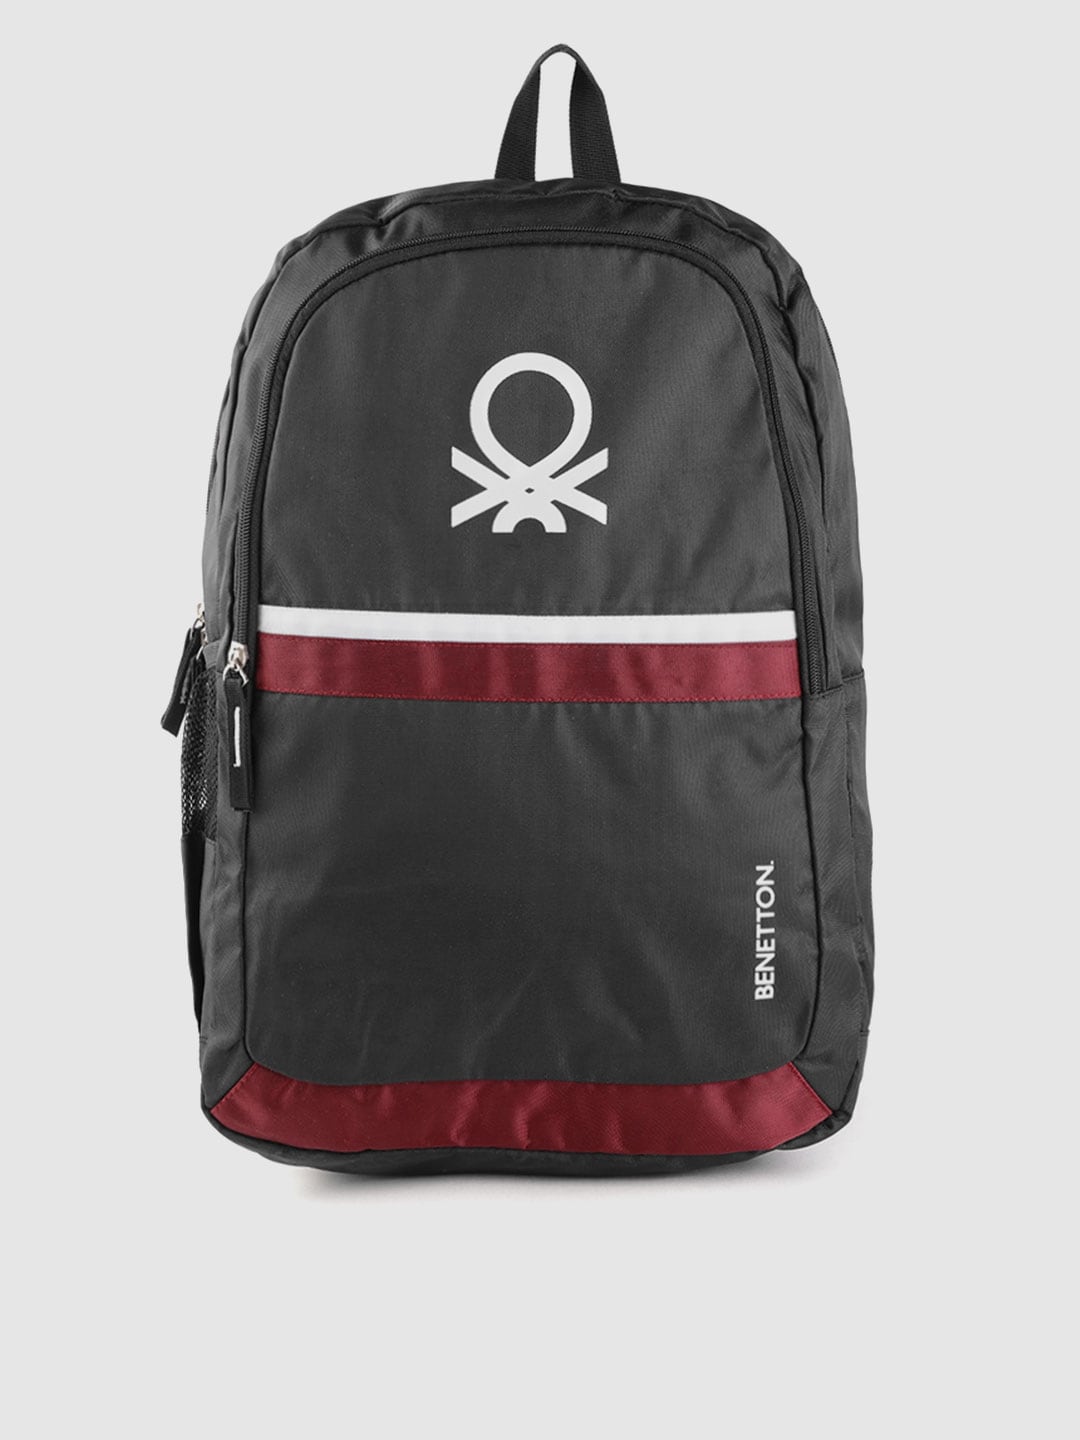 United Colors of Benetton Unisex Black & Red Brand Logo Print Backpack Price in India